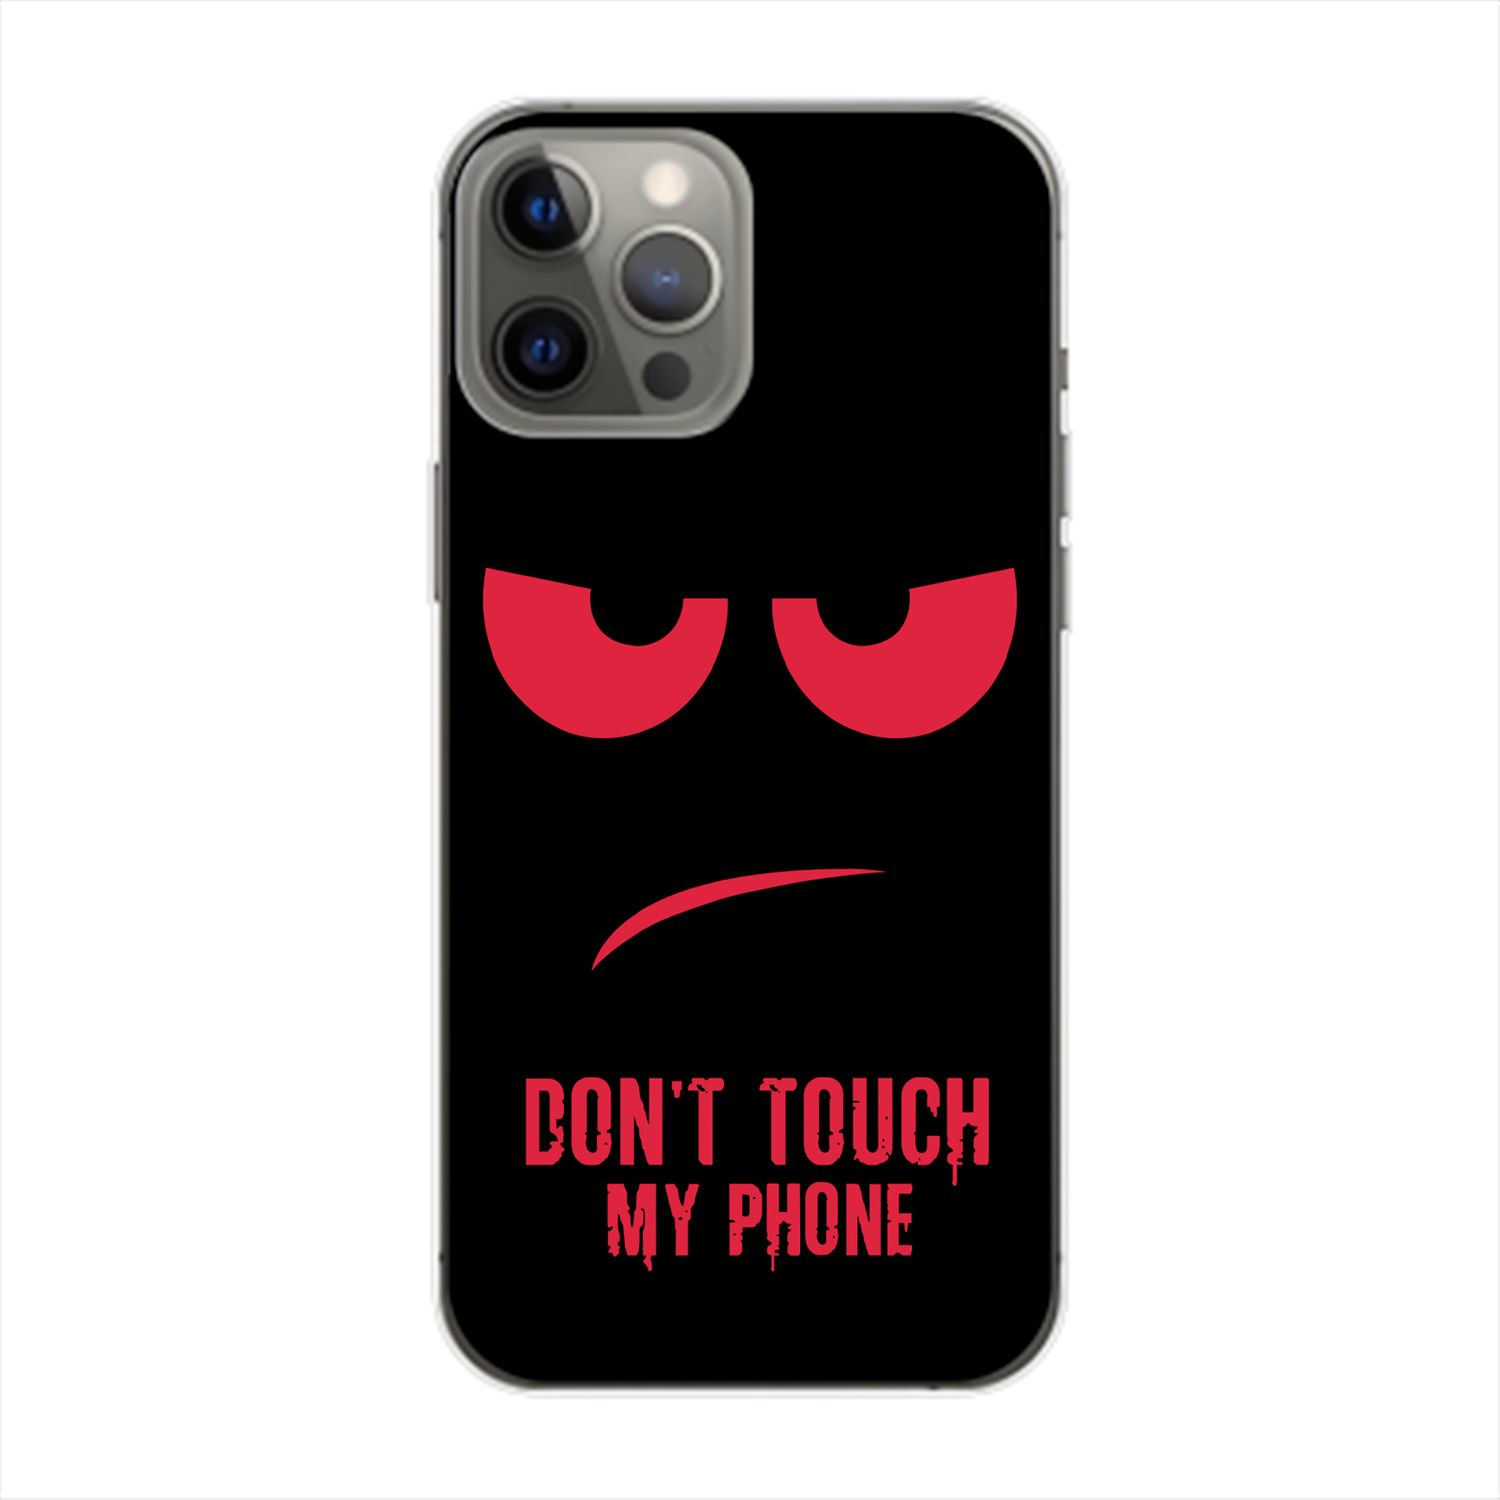 Pro Touch My Rot 14 Max, Dont KÖNIG Backcover, Case, Apple, Phone DESIGN iPhone